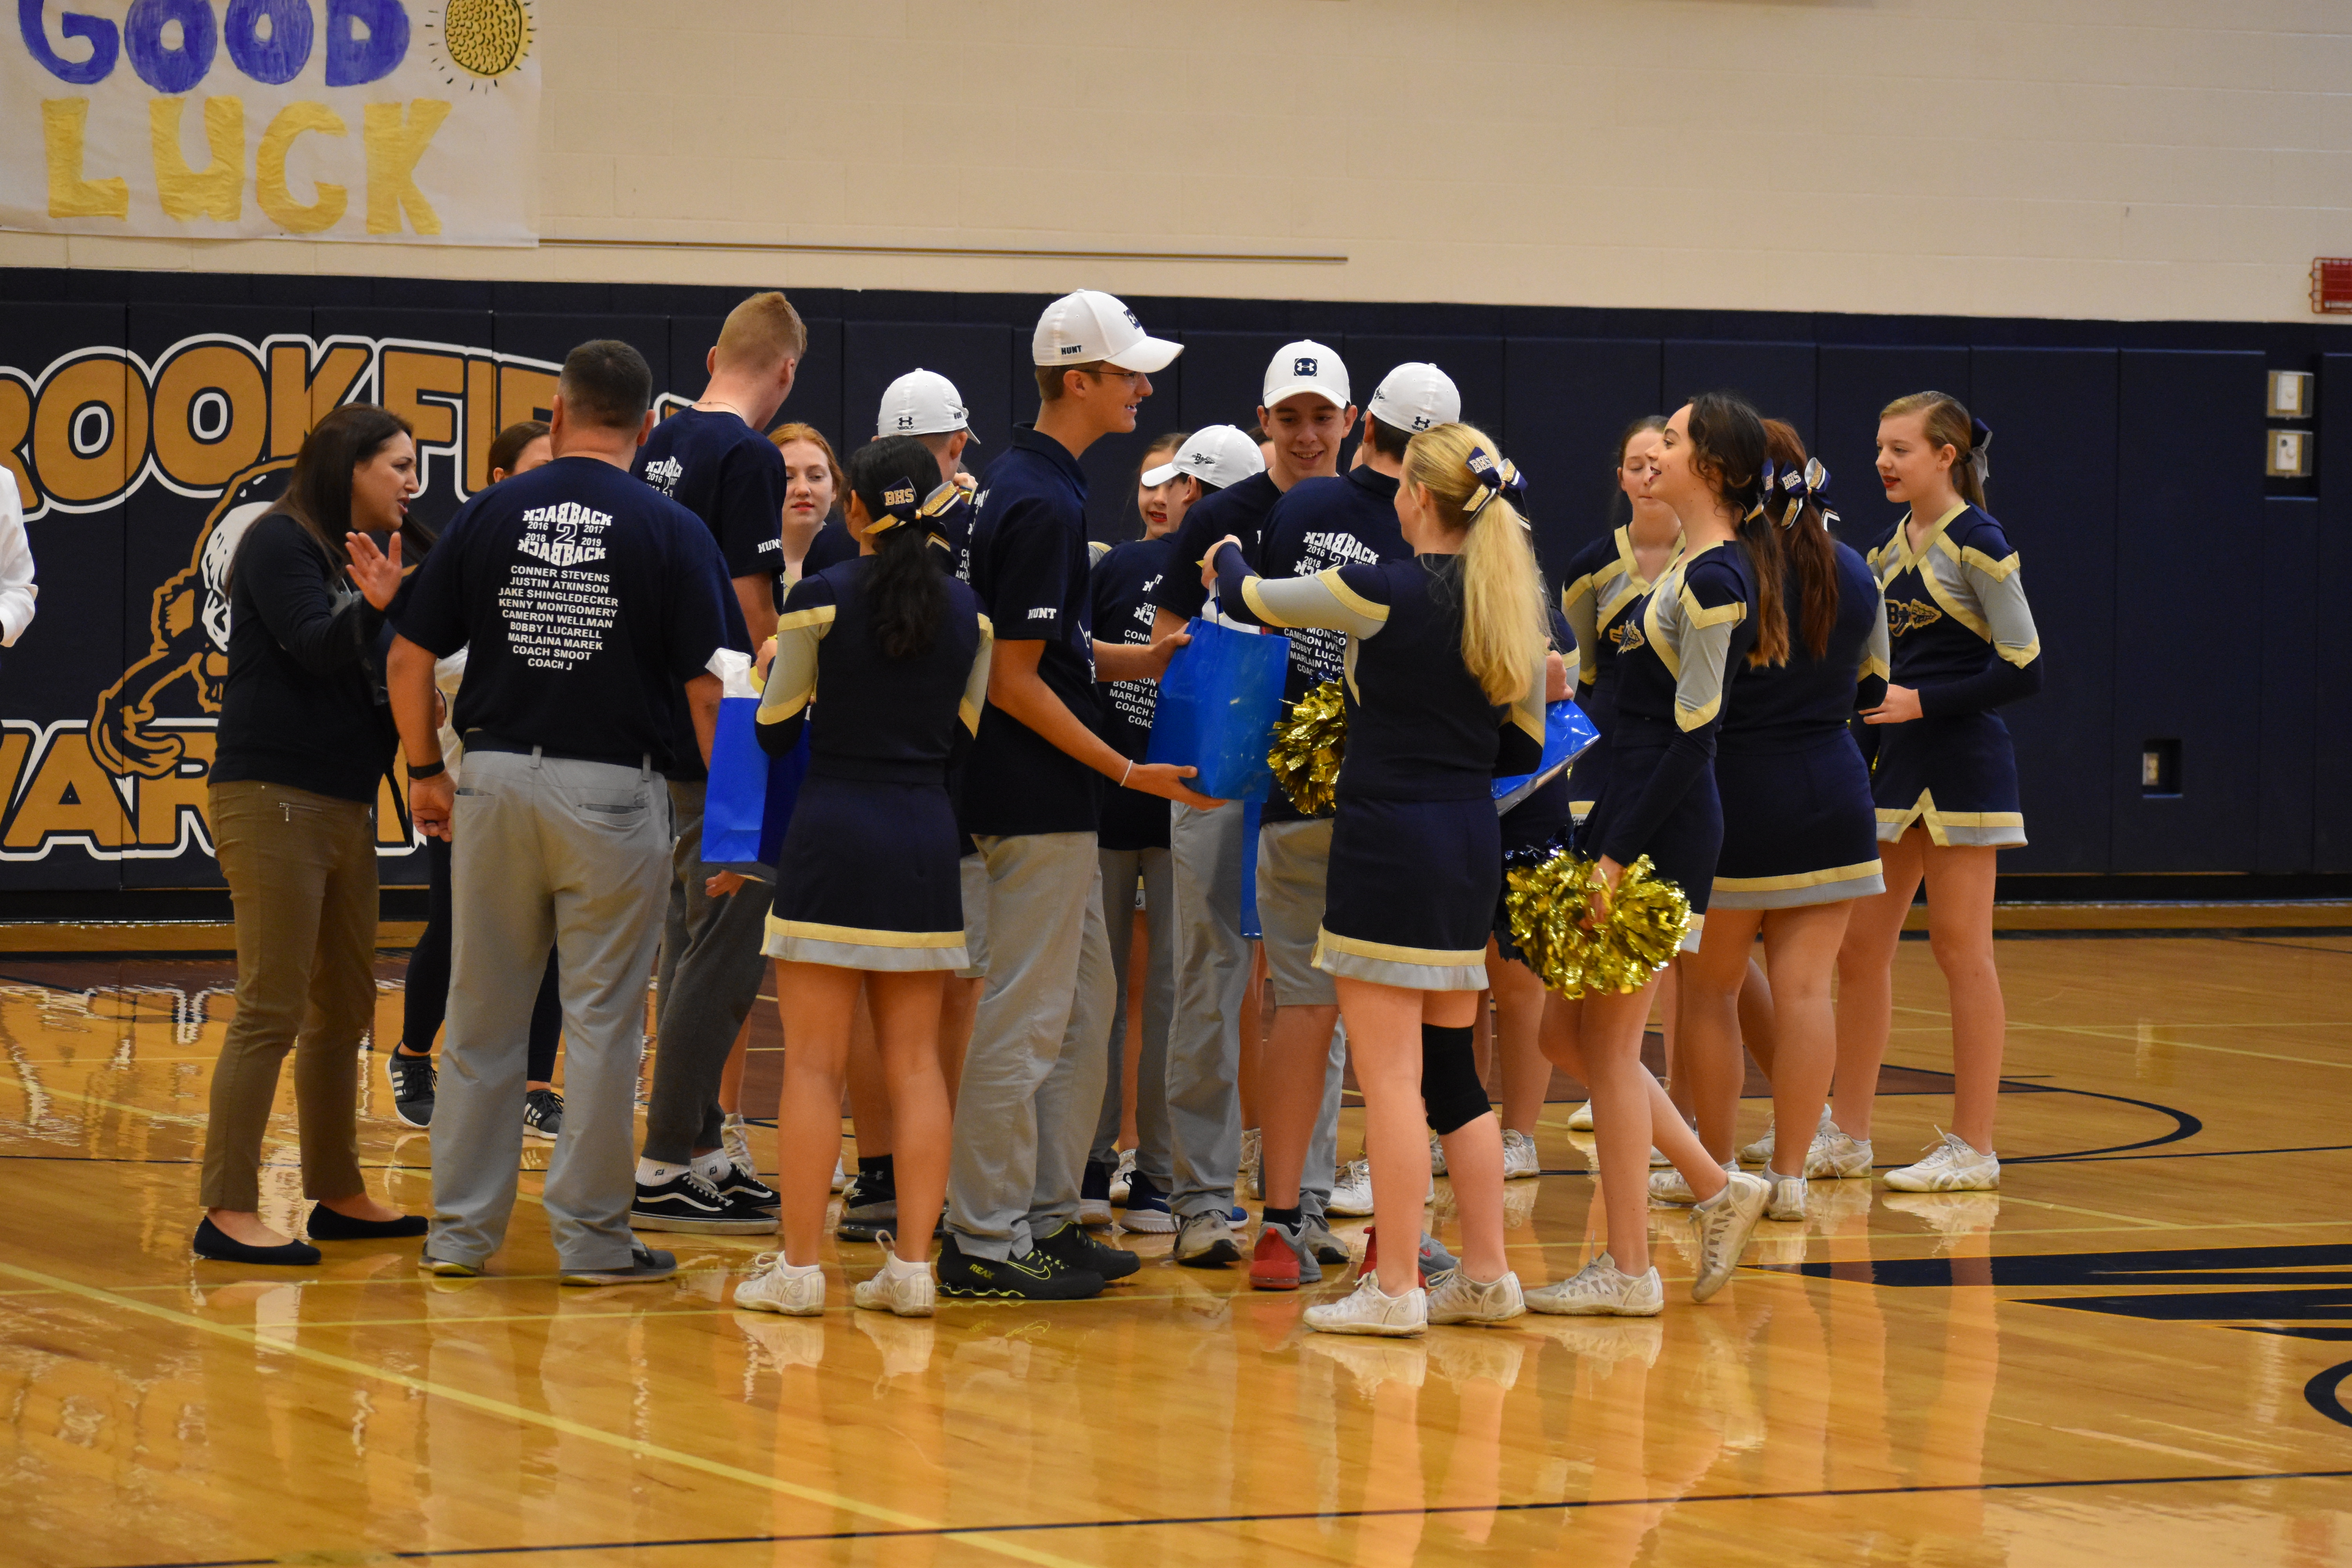 Cheerleaders pass out goodie bags to the golf team members.